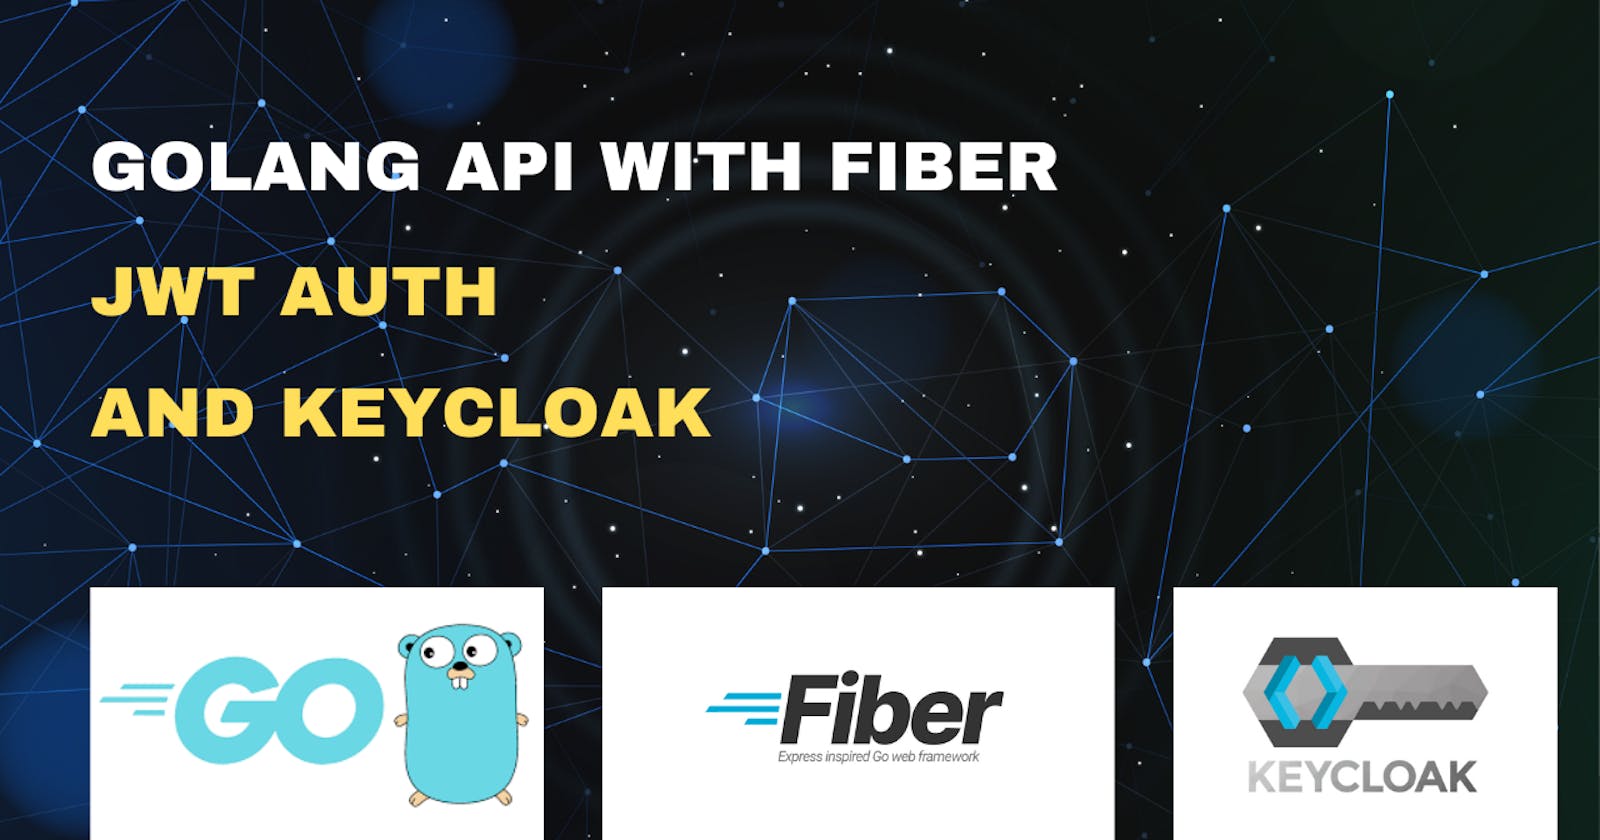 Golang API with Fiber, JWT auth and Keycloak